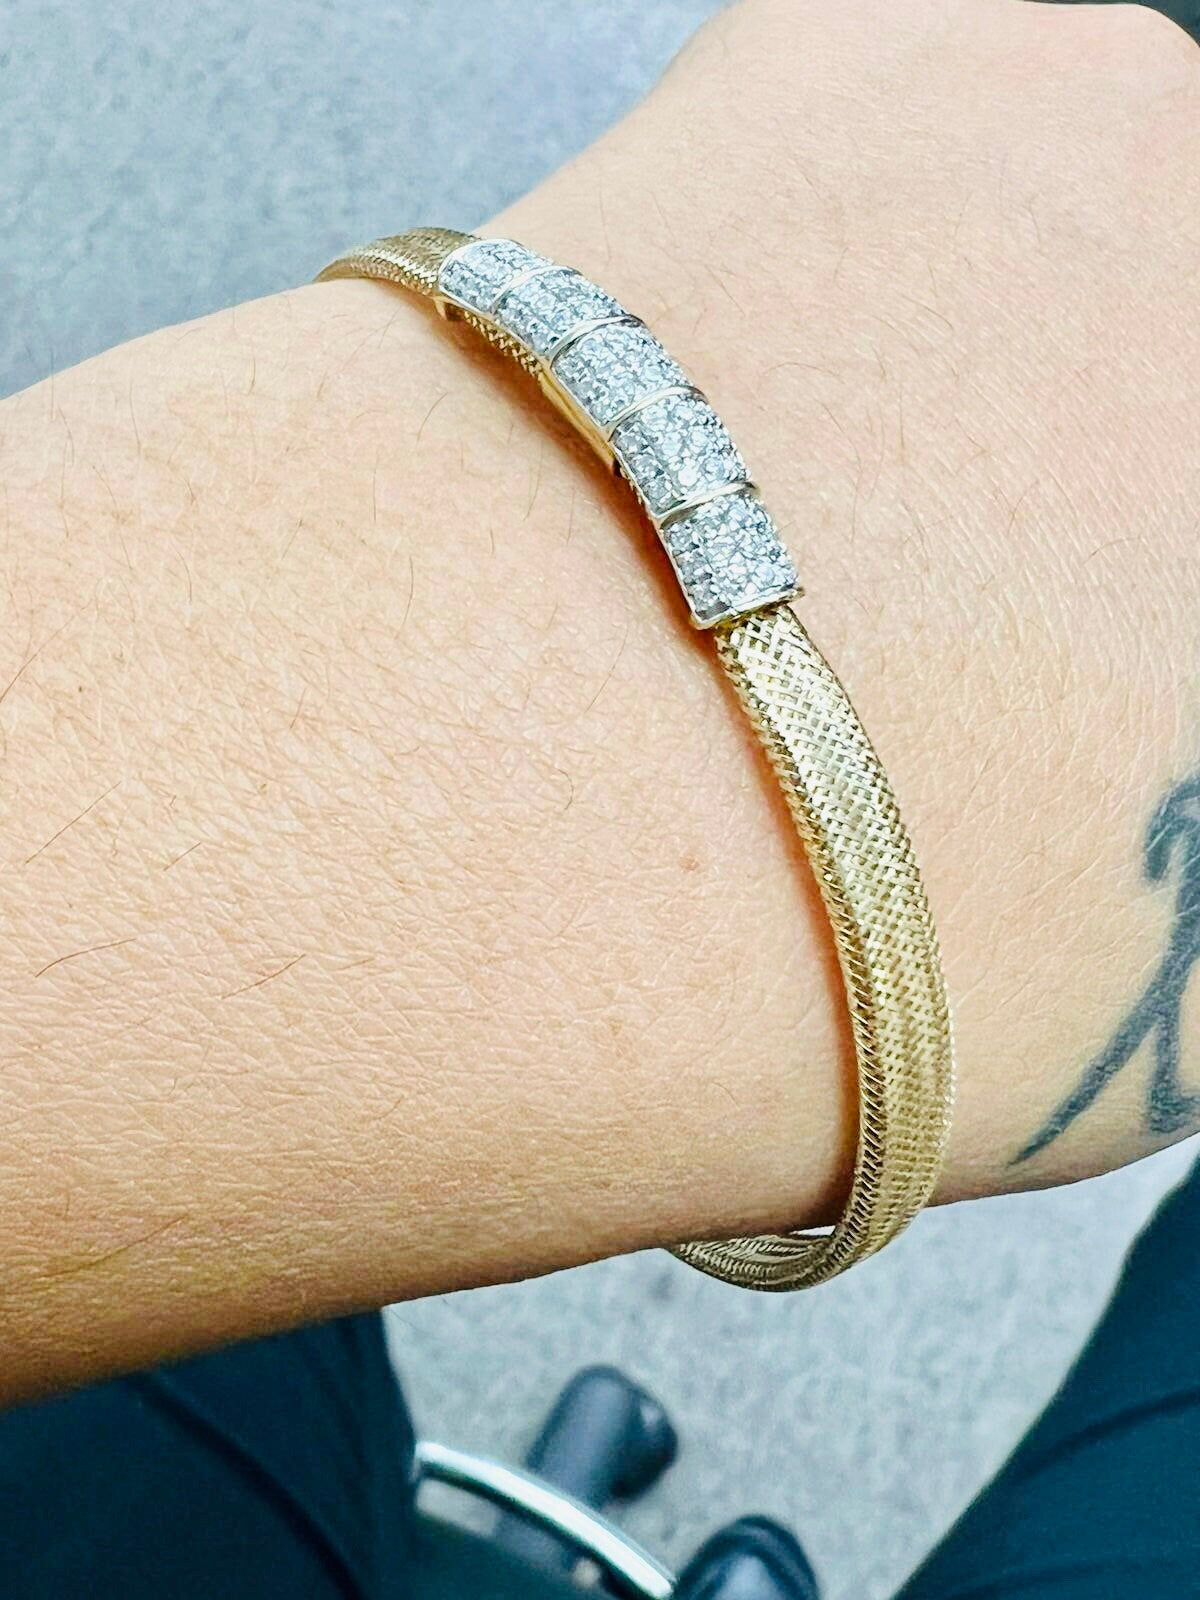 10k solid gold bangle, genuine natural i bangle unisex, expanding bangle, best gift! HUGE Sale! Not lab made, Not plated, Unbeatable! Sale!